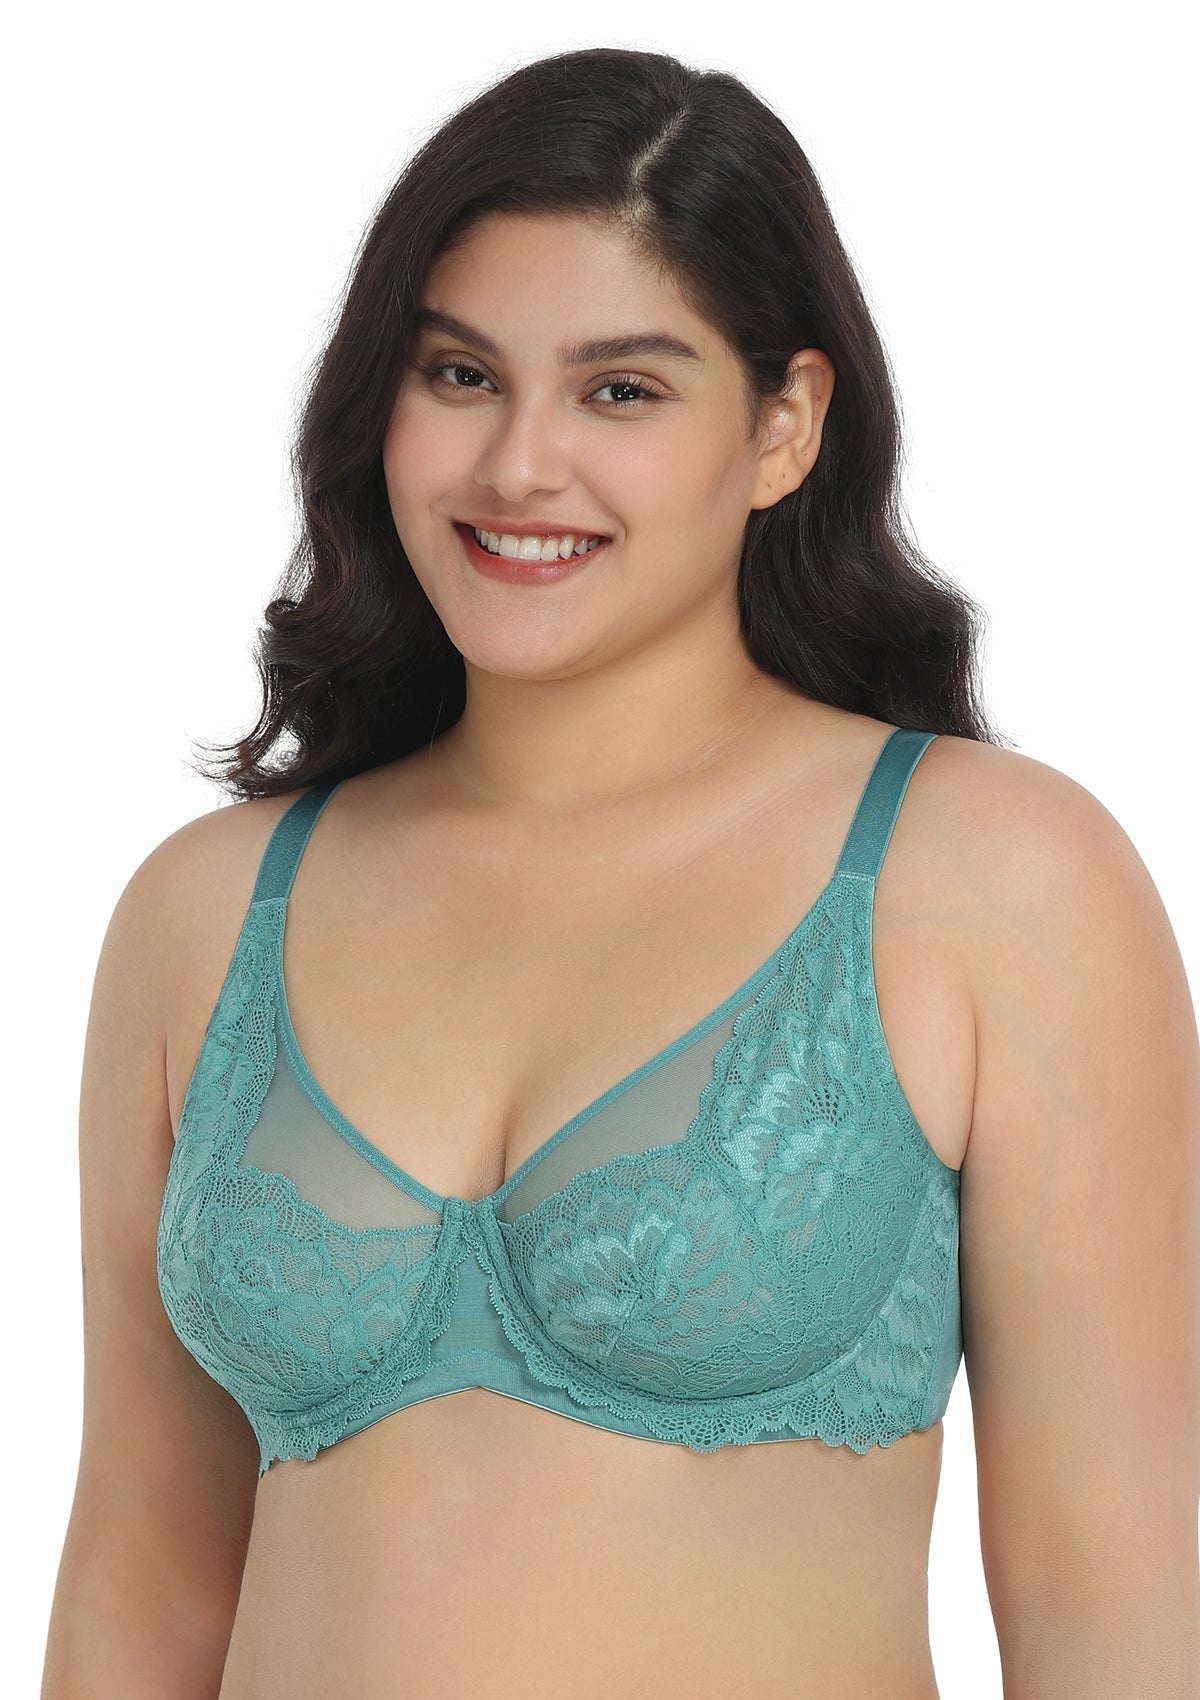 HSIA Paeonia Lace Full Coverage Underwire Non-Padded Uplifting Bra - Light Coral / 40 / C